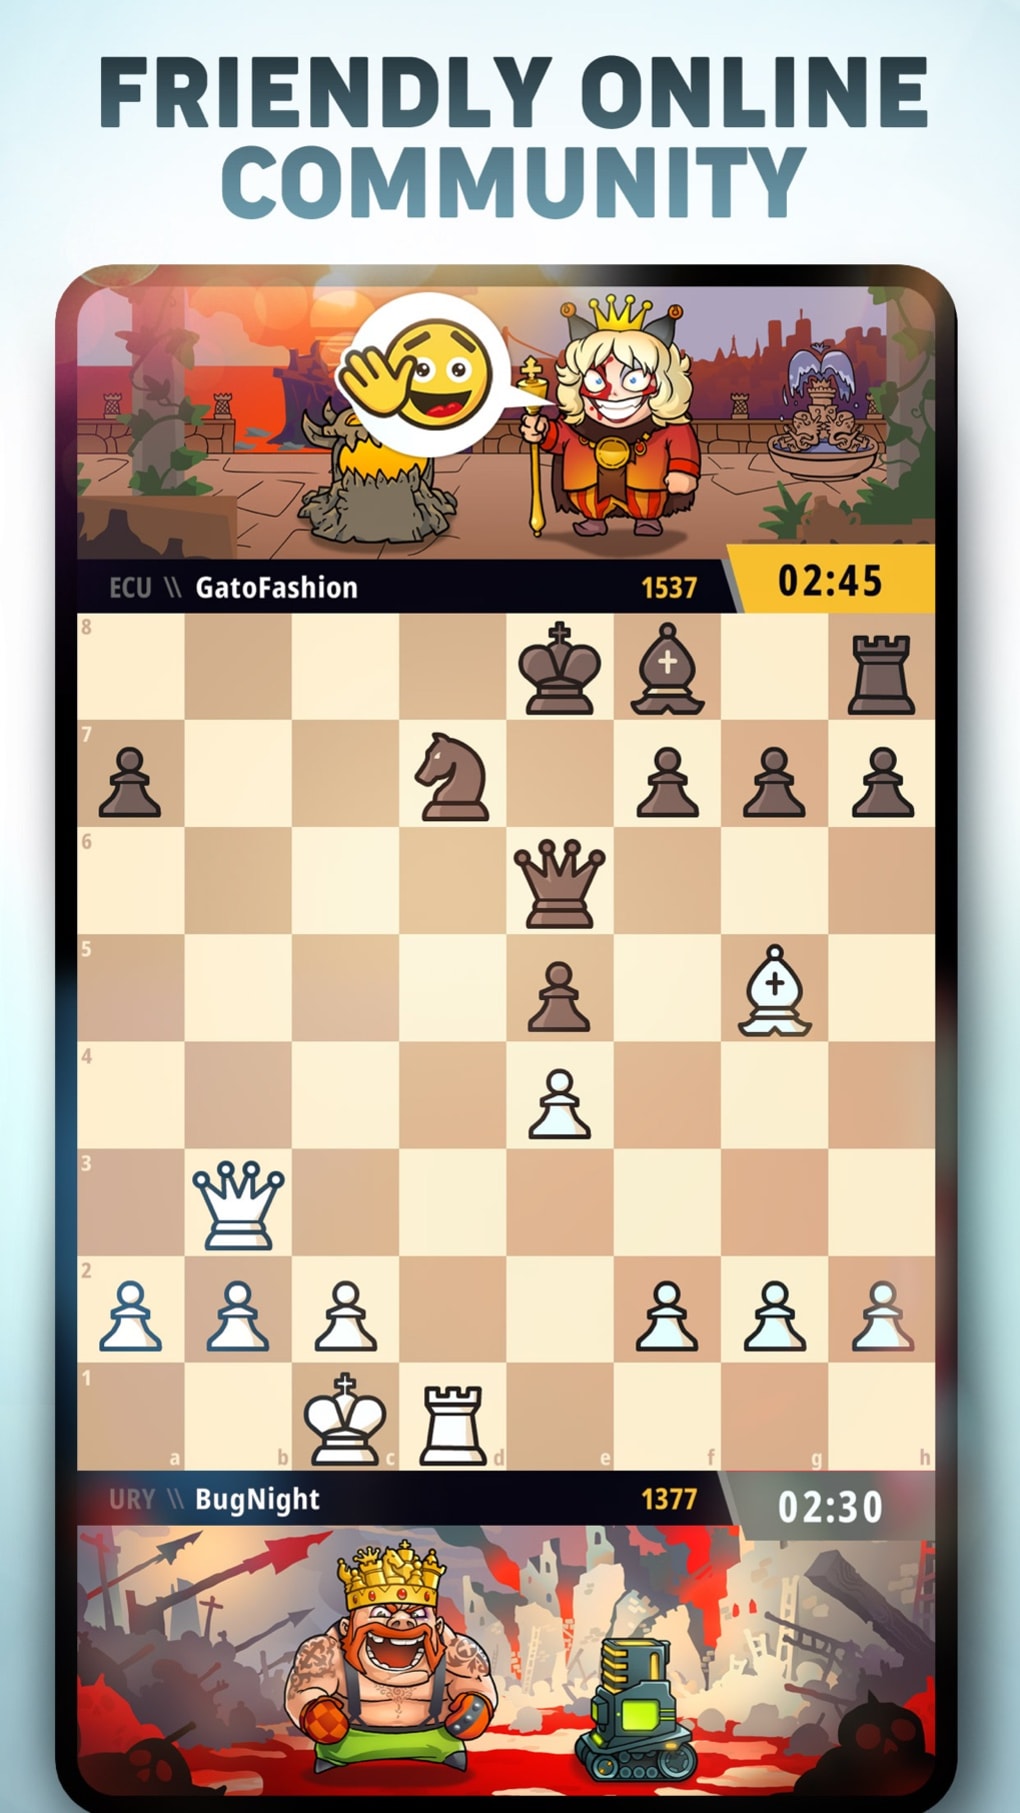 Download Chess Universe - Play free chess online & offline App for